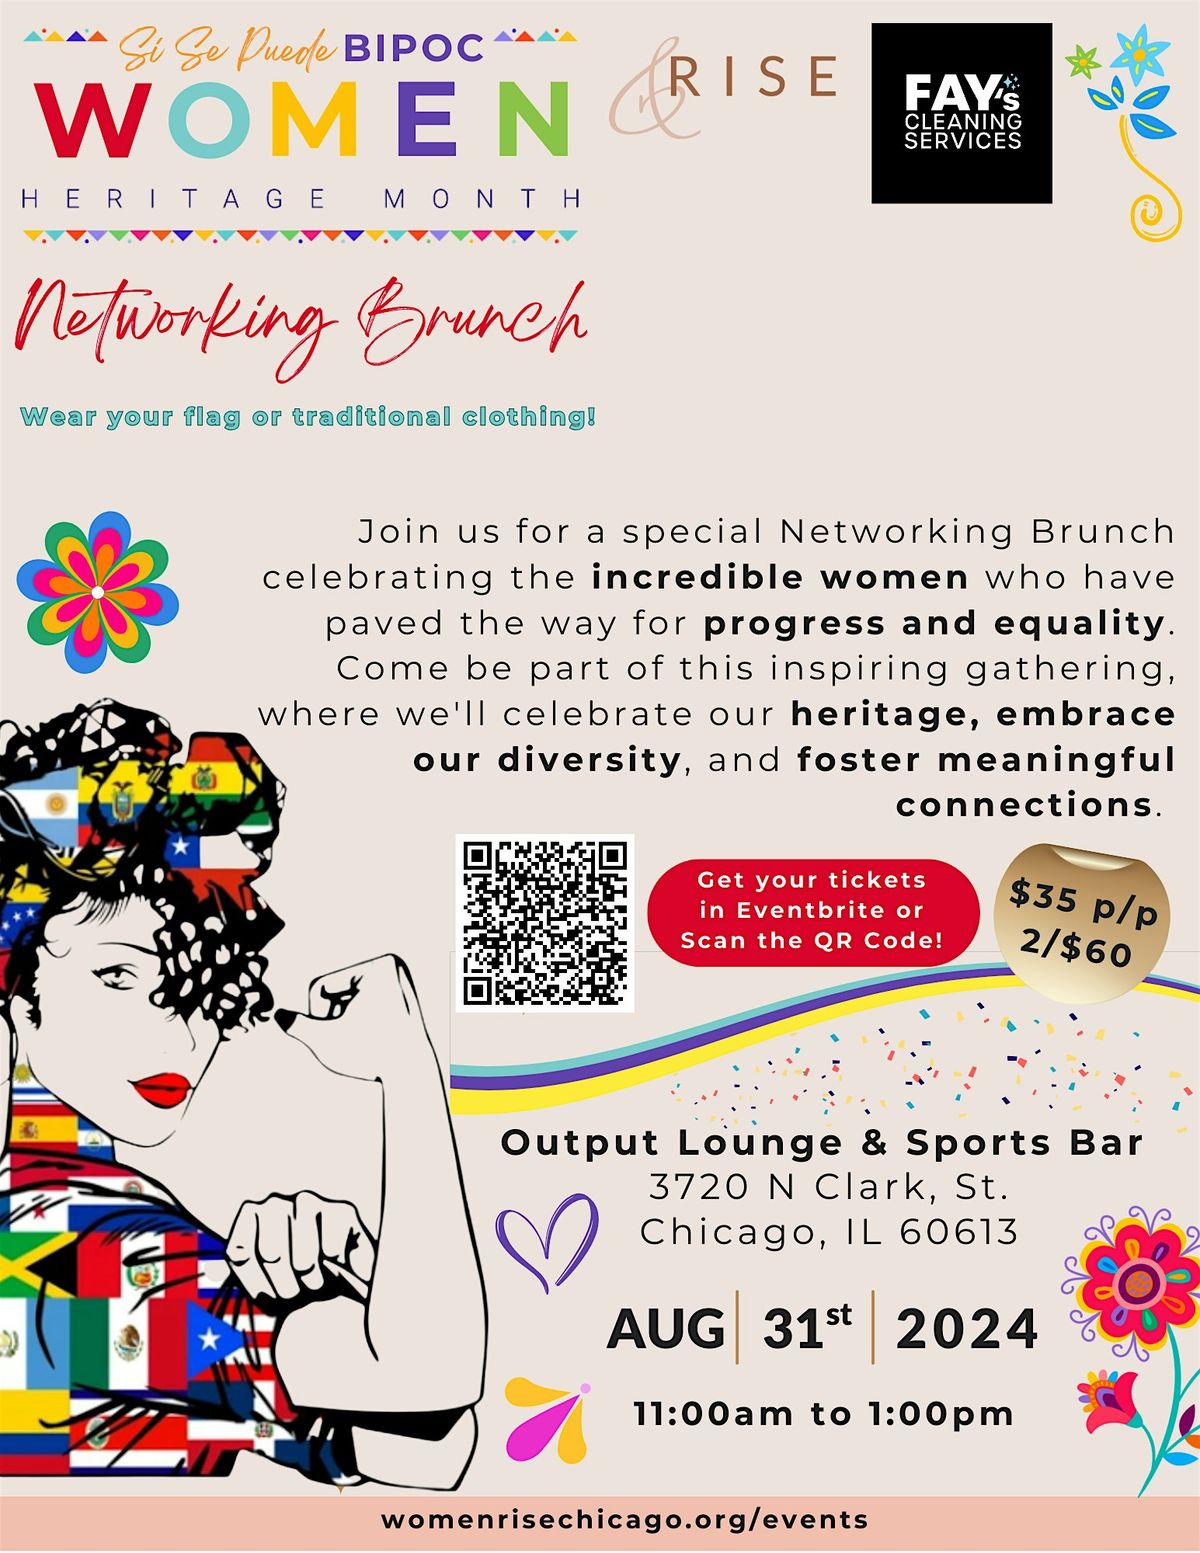 Si Se Puede: BIPOC Women's Networking Brunch